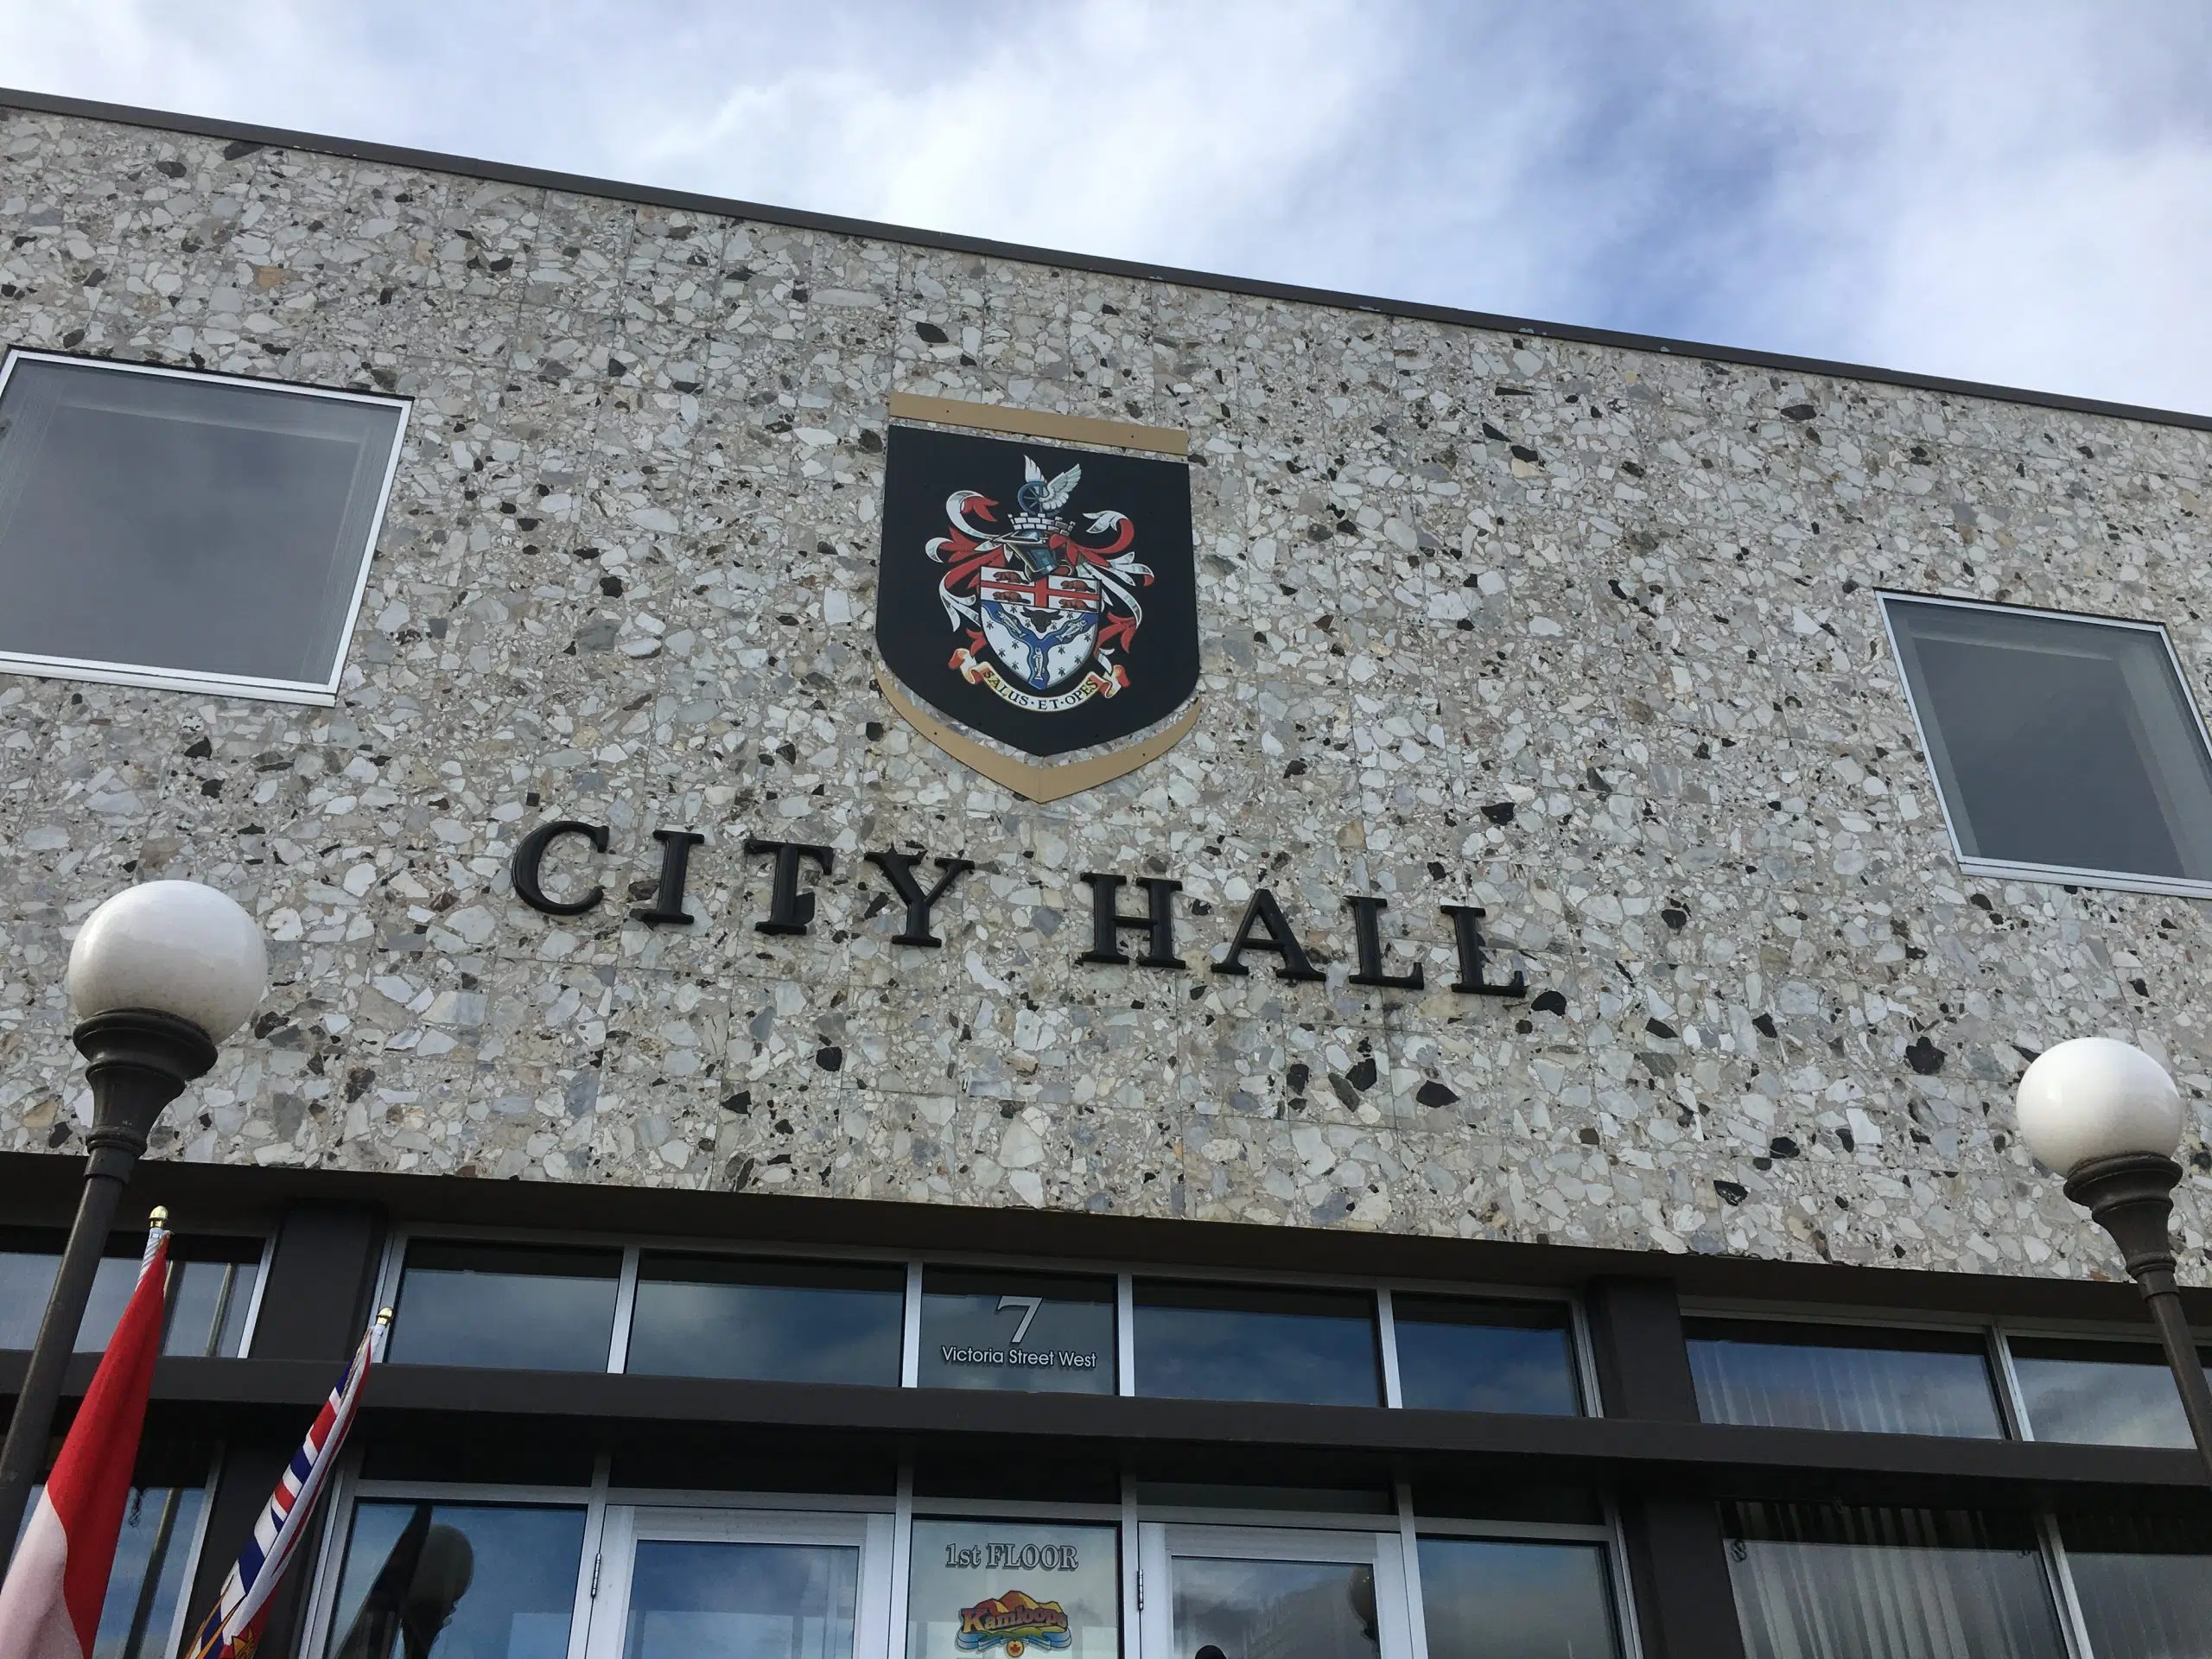 Cost increases surfacing as Kamloops city hall puts together 2019 budget